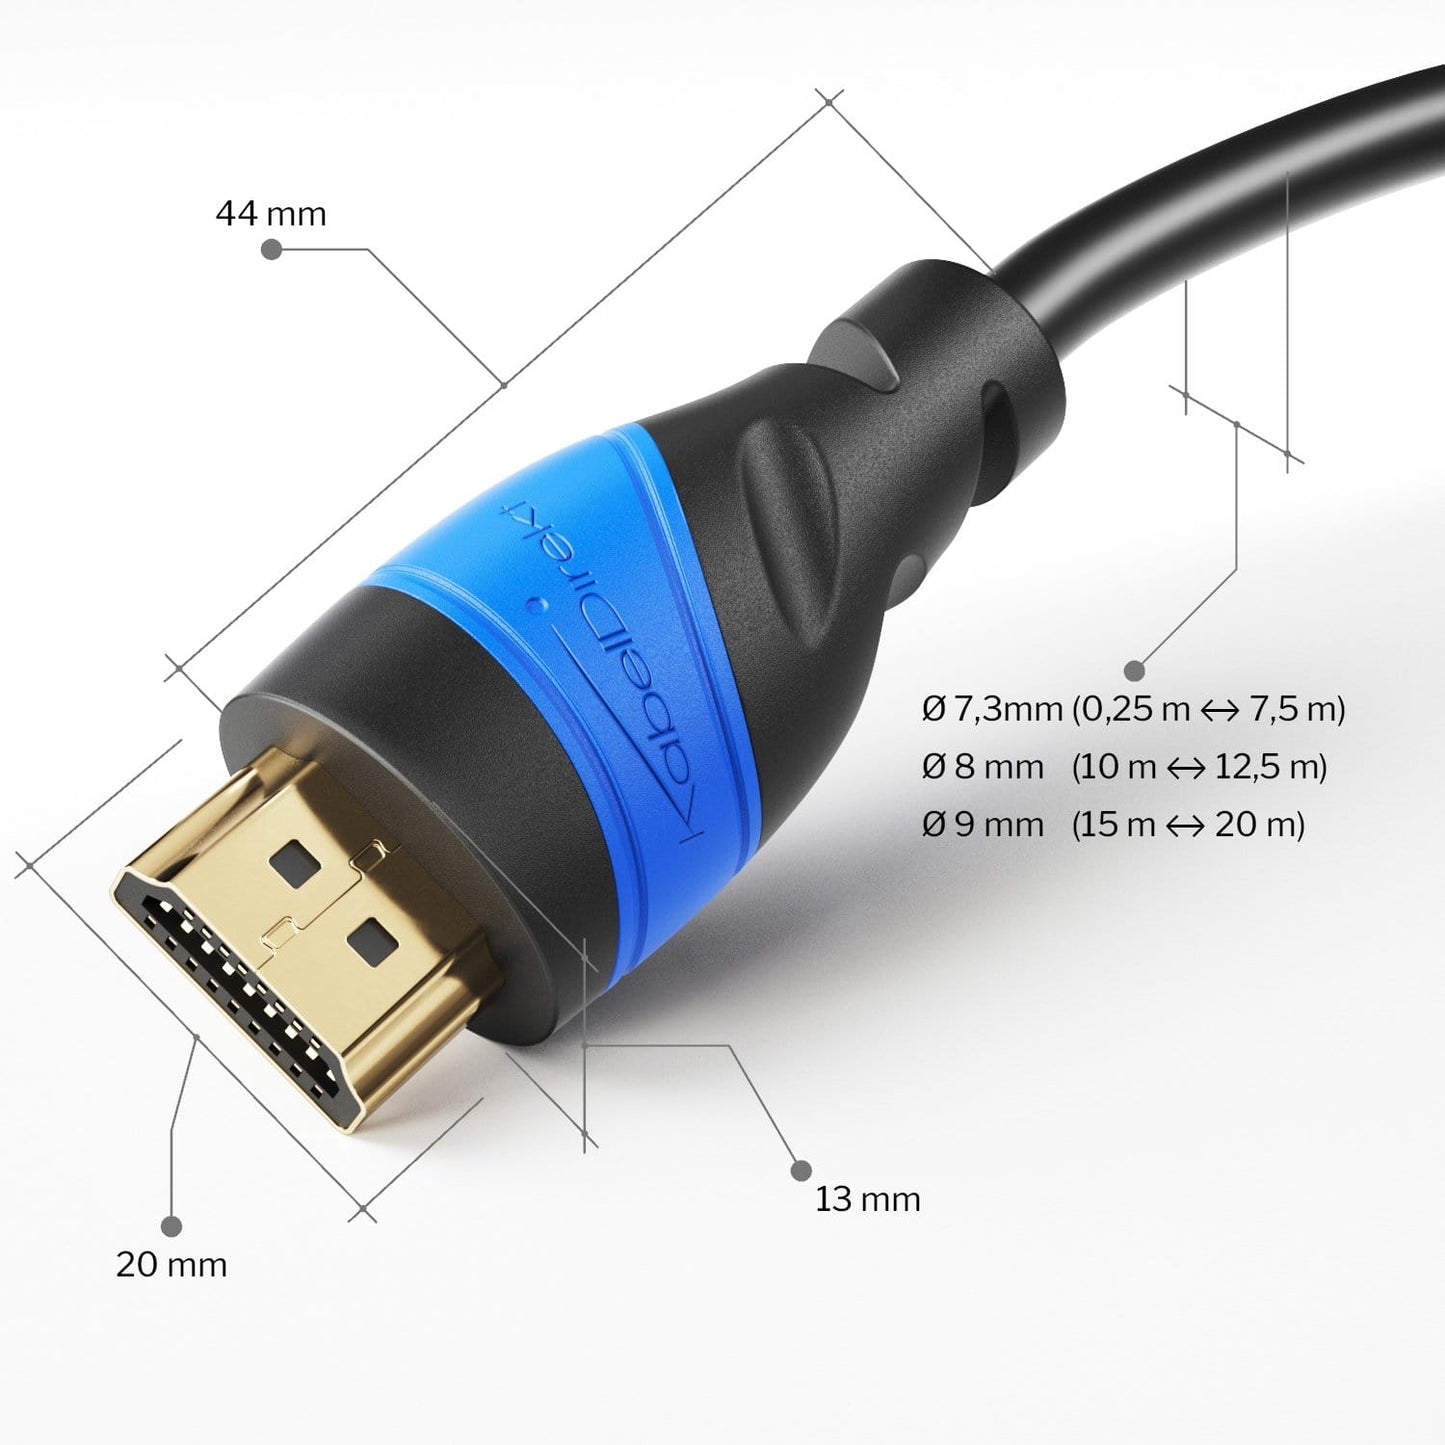 HDMI extension cable - compatible with HDMI 2.0a/b 2.0, 1.4a, 4K Ultra HD, 3D, Full HD, 1080p, HDR, ARC, Ethernet